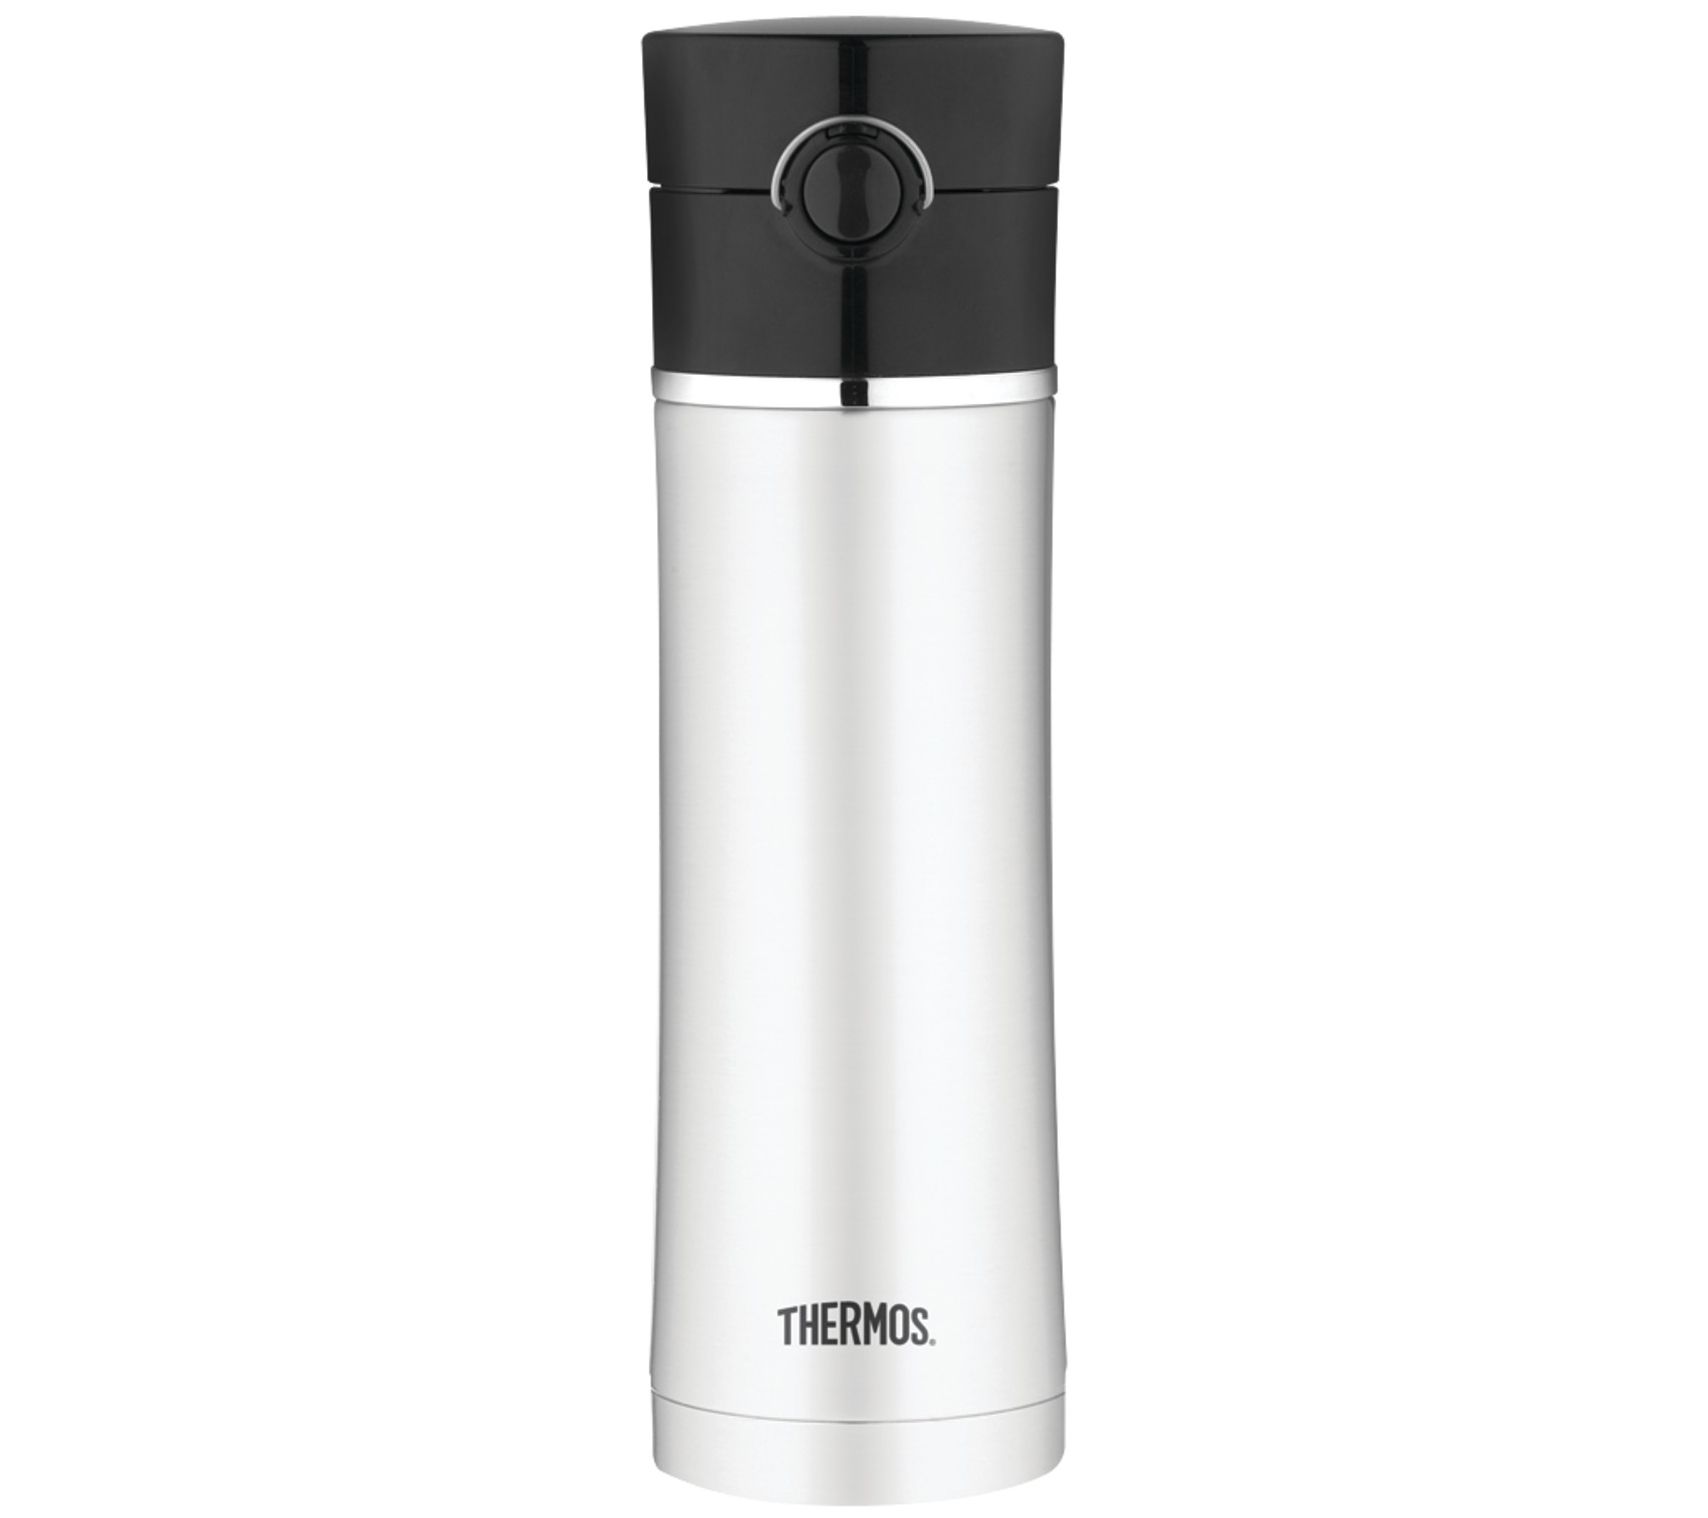 Thermos 16 Oz Sipp Vacuum Insulated Stainless Steel Drink Bottle in Steel  Black